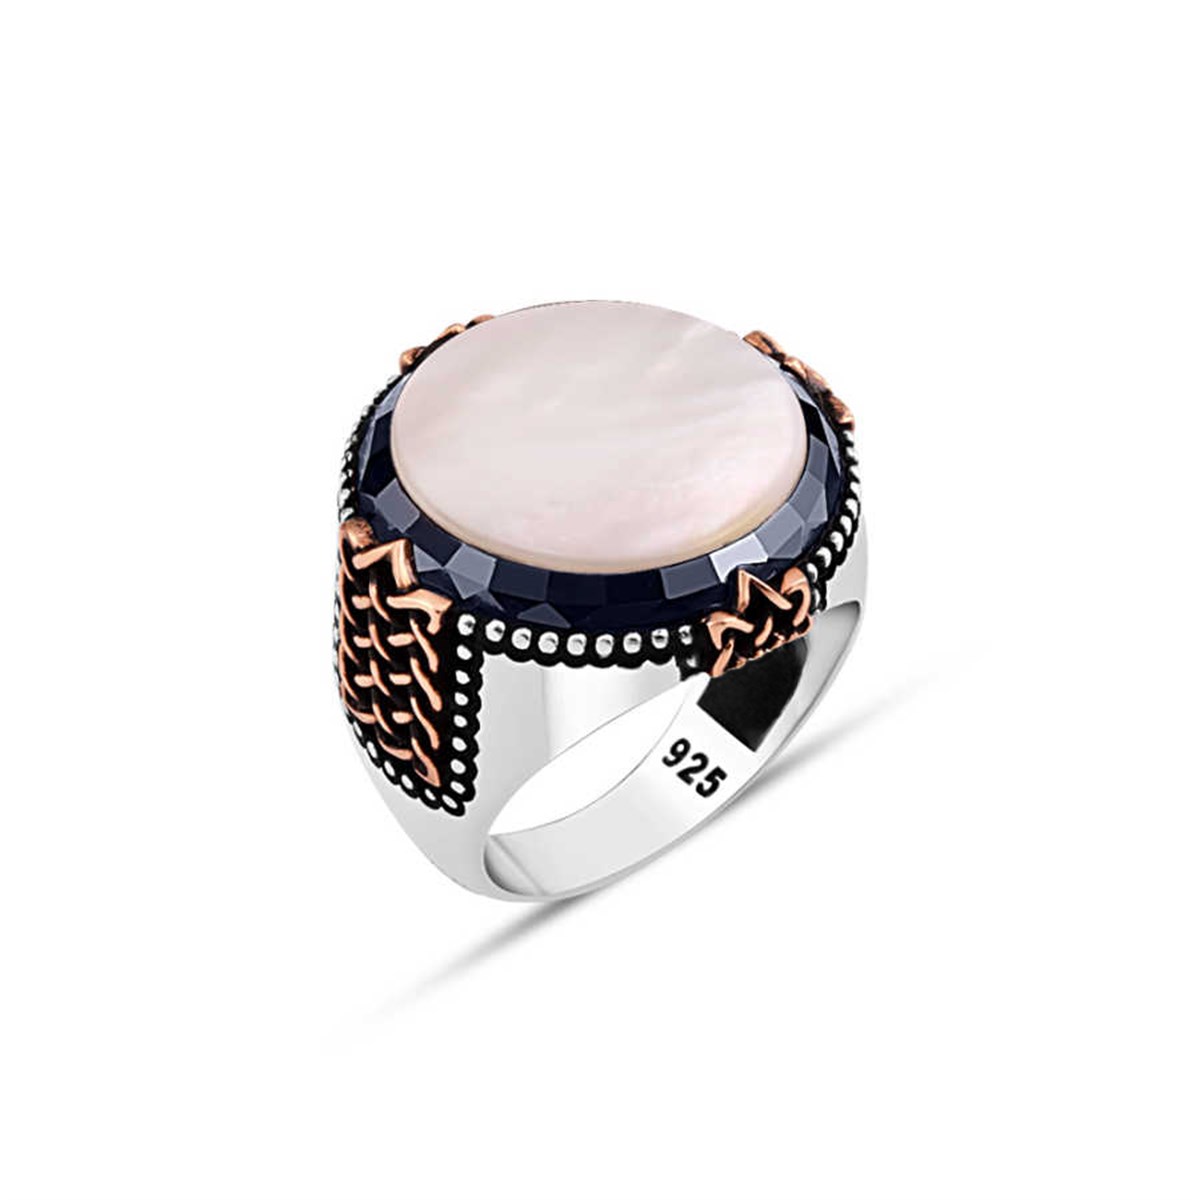 Mother of Pearl Stone Silver Men's Ring